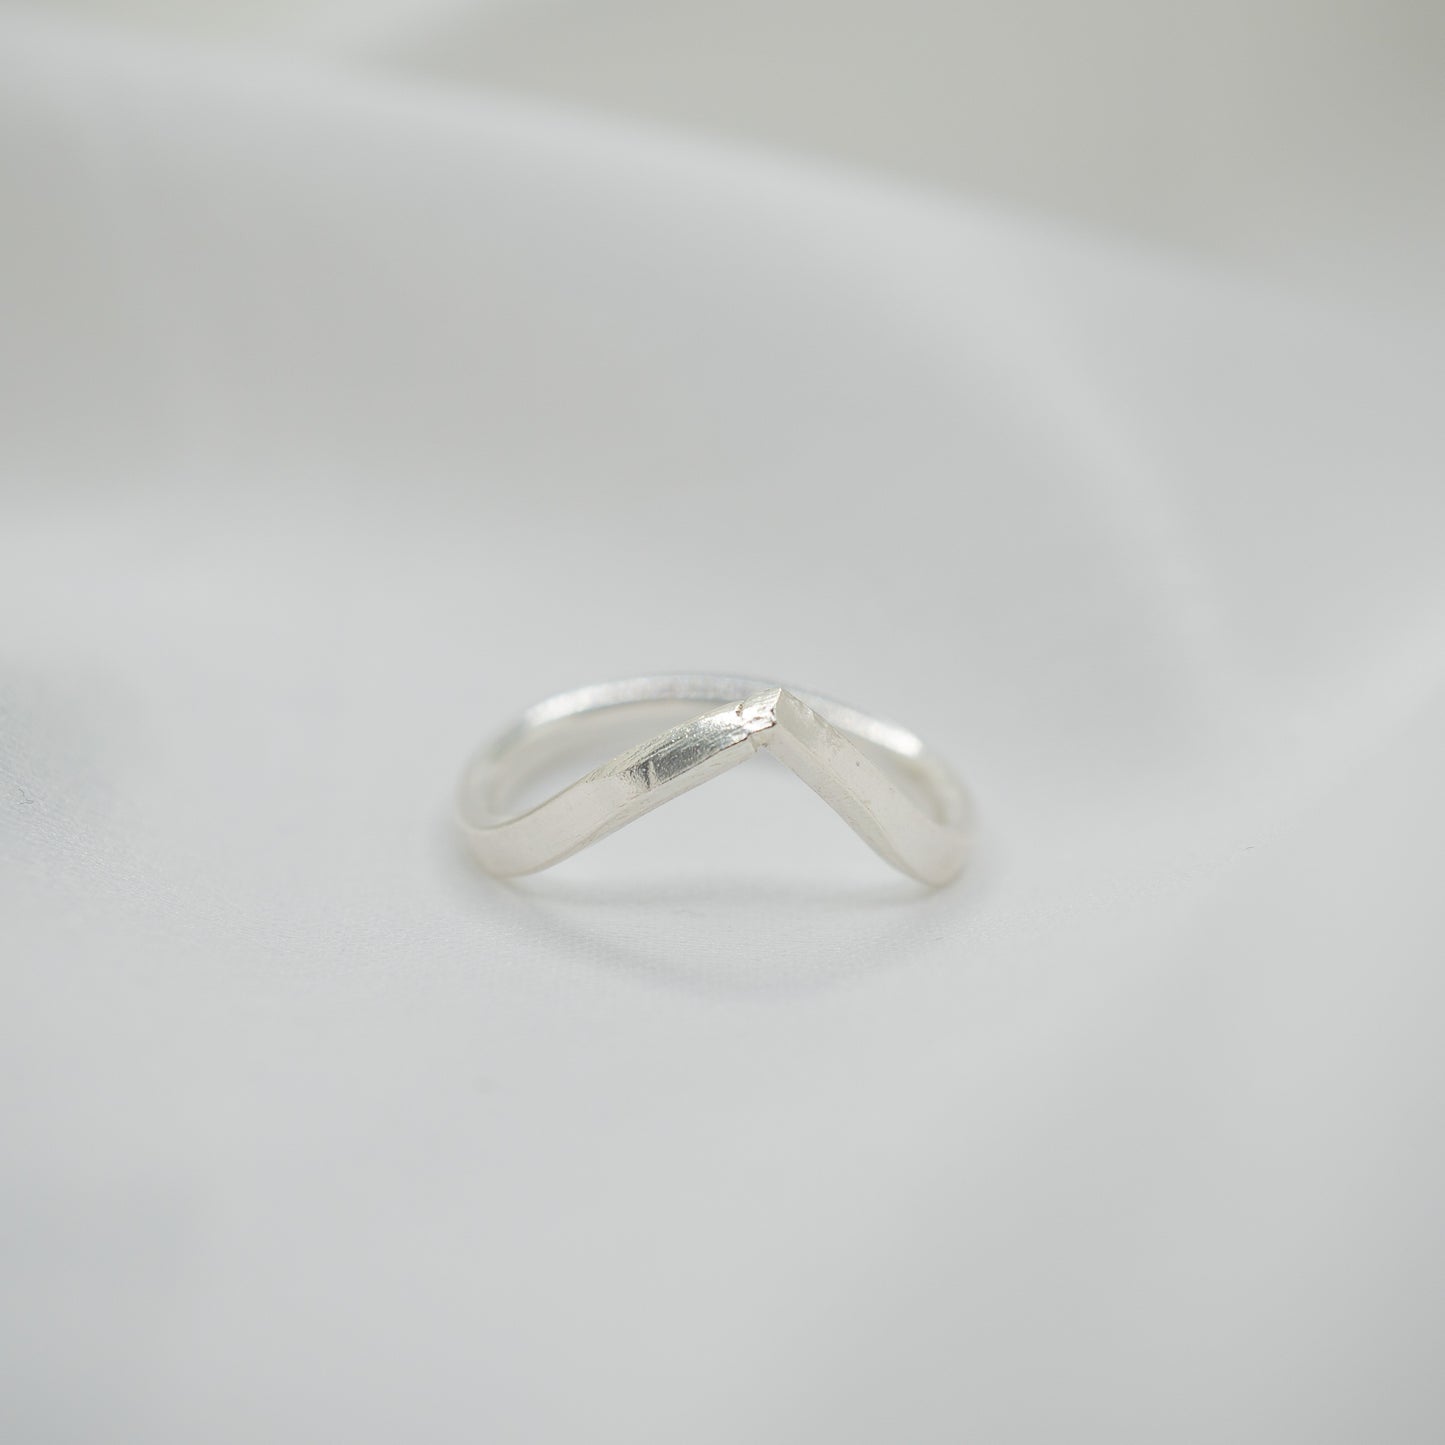 Sterling Silver Chevron Ring - shot on white - front view